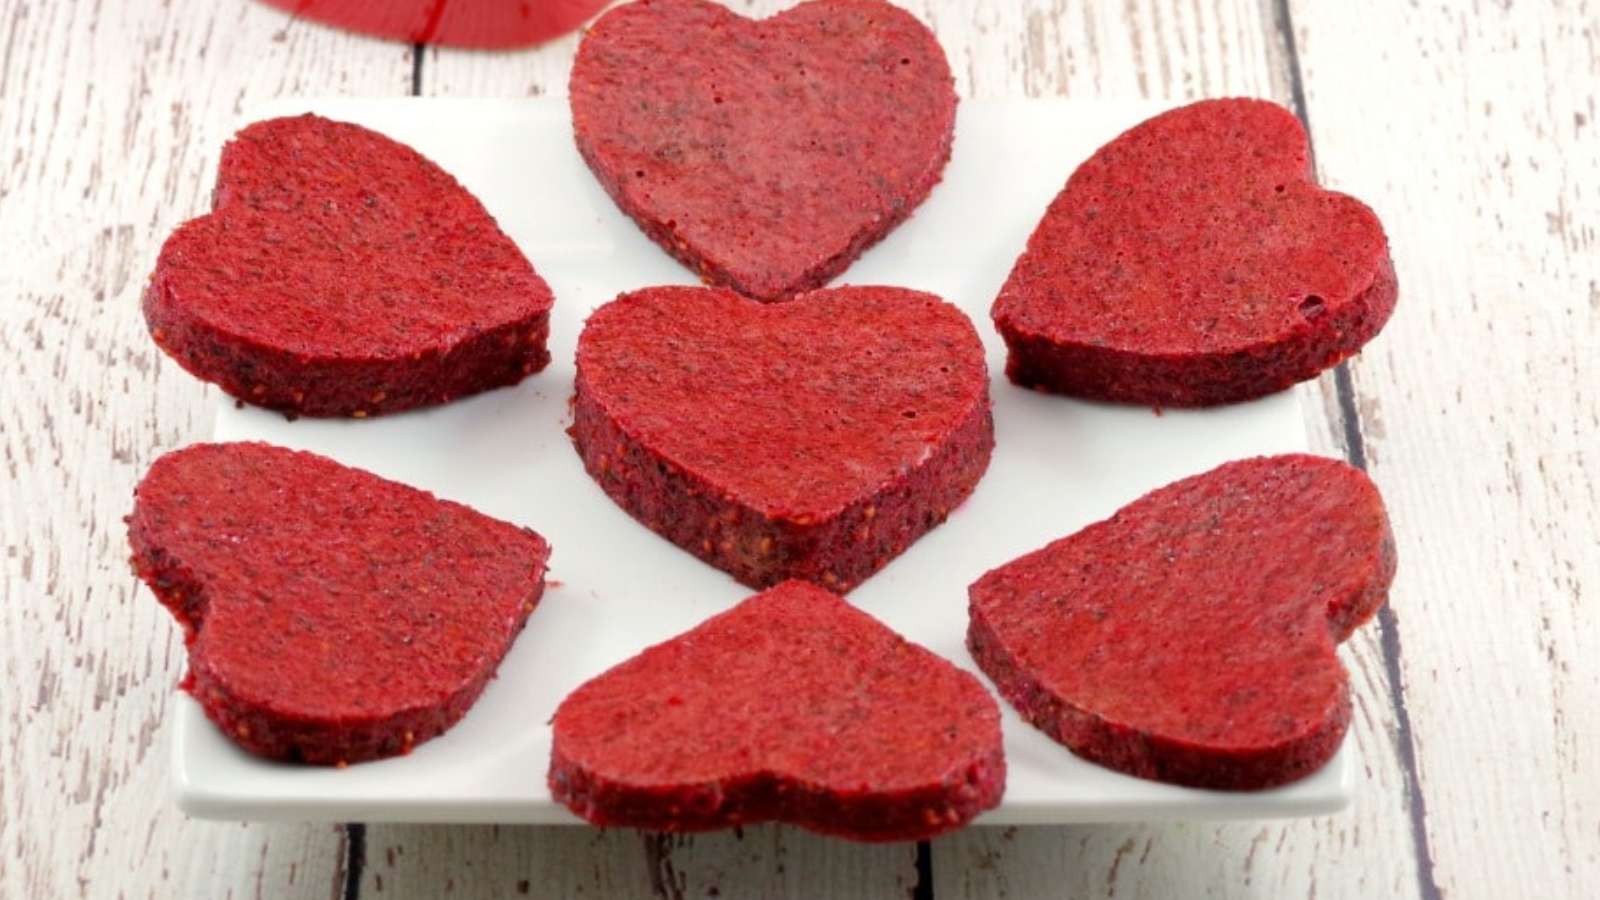 Heart shaped red beets on a white plate.